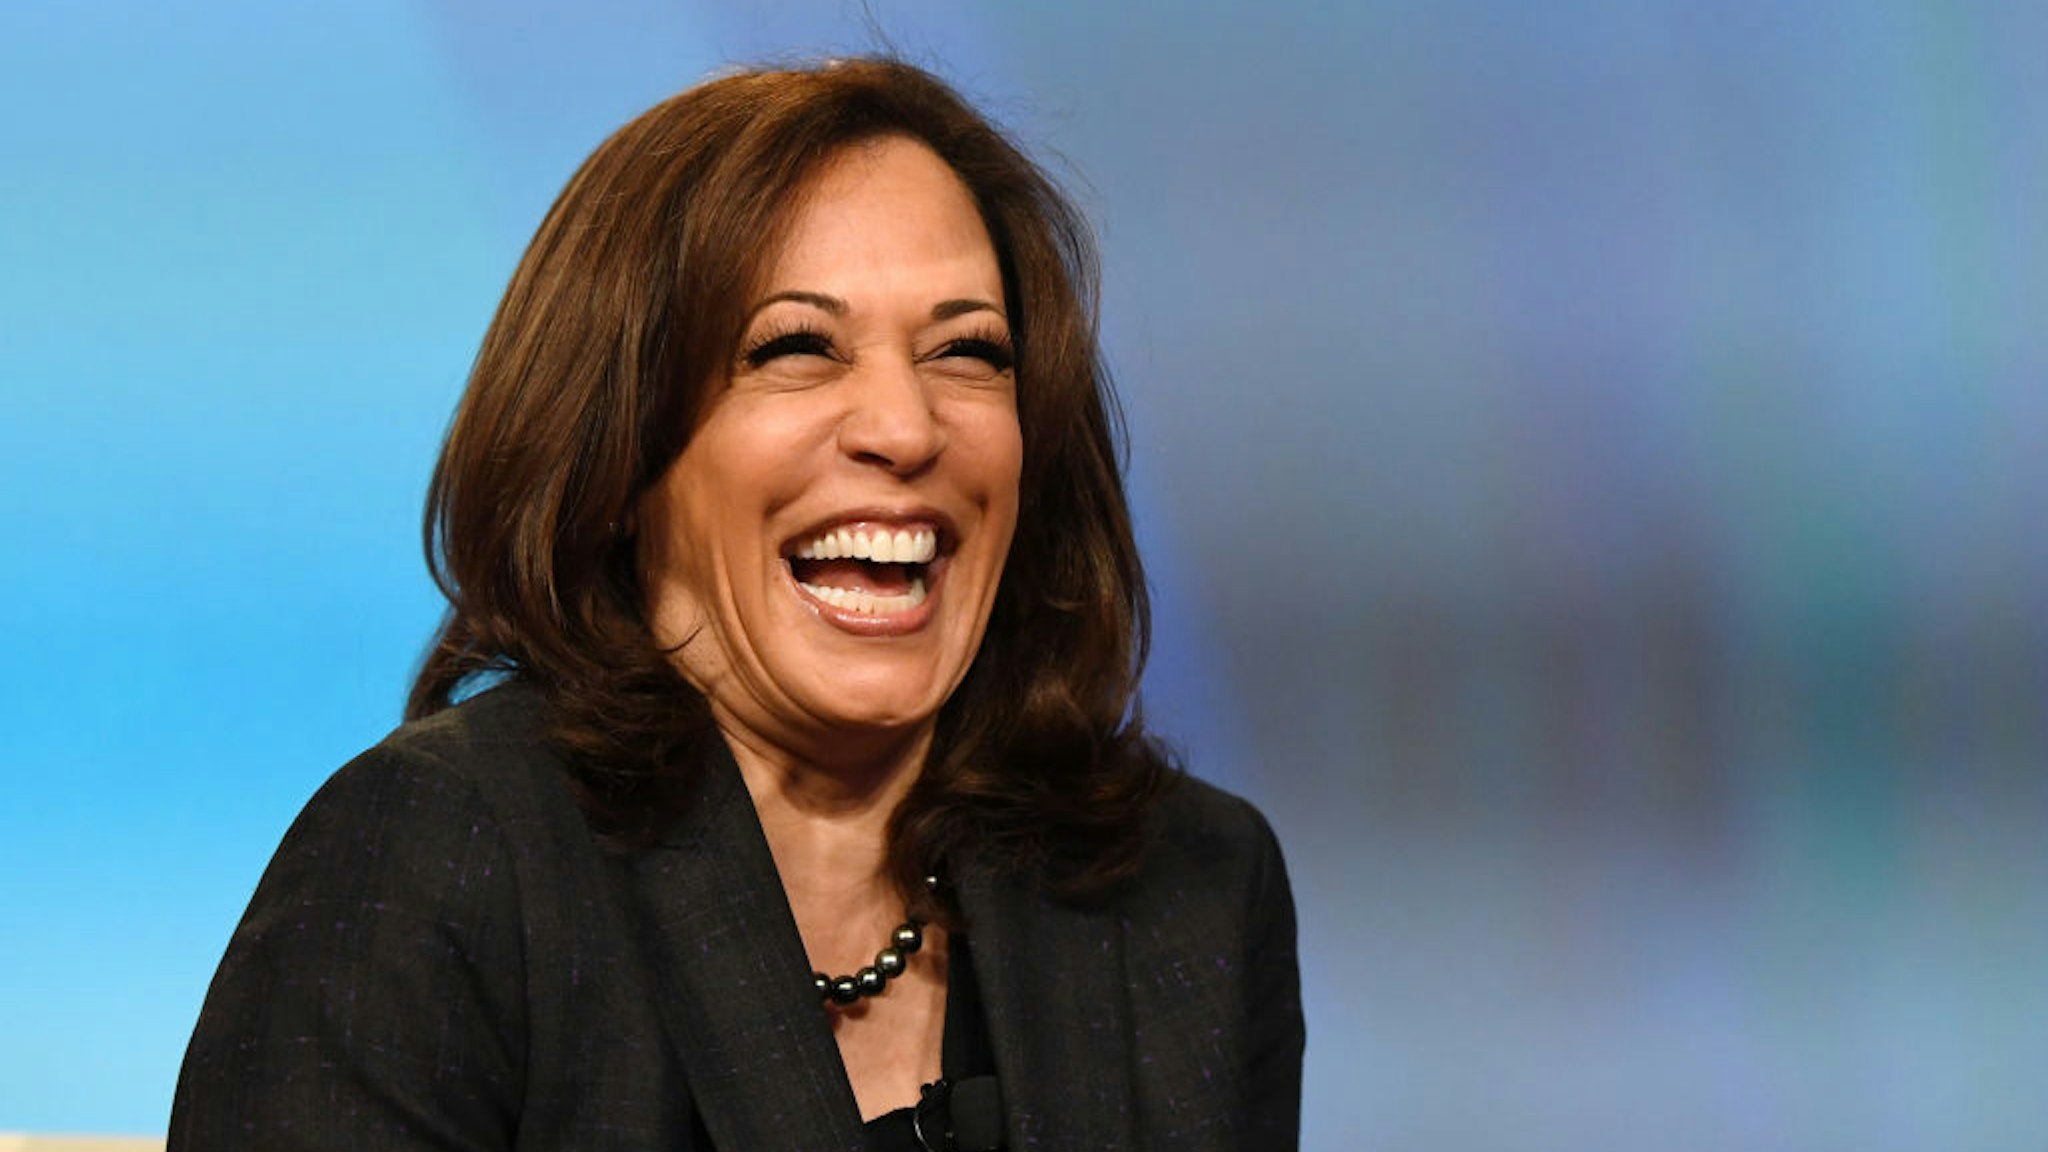 LAS VEGAS, NEVADA - MARCH 01: U.S. Sen. Kamala Harris (D-CA) laughs while speaking at the "Conversations that Count" event during the Black Enterprise Women of Power Summit at The Mirage Hotel &amp; Casino on March 1, 2019 in Las Vegas, Nevada. Harris is campaigning for the 2020 Democratic nomination for president. (Photo by Ethan Miller/Getty Images)